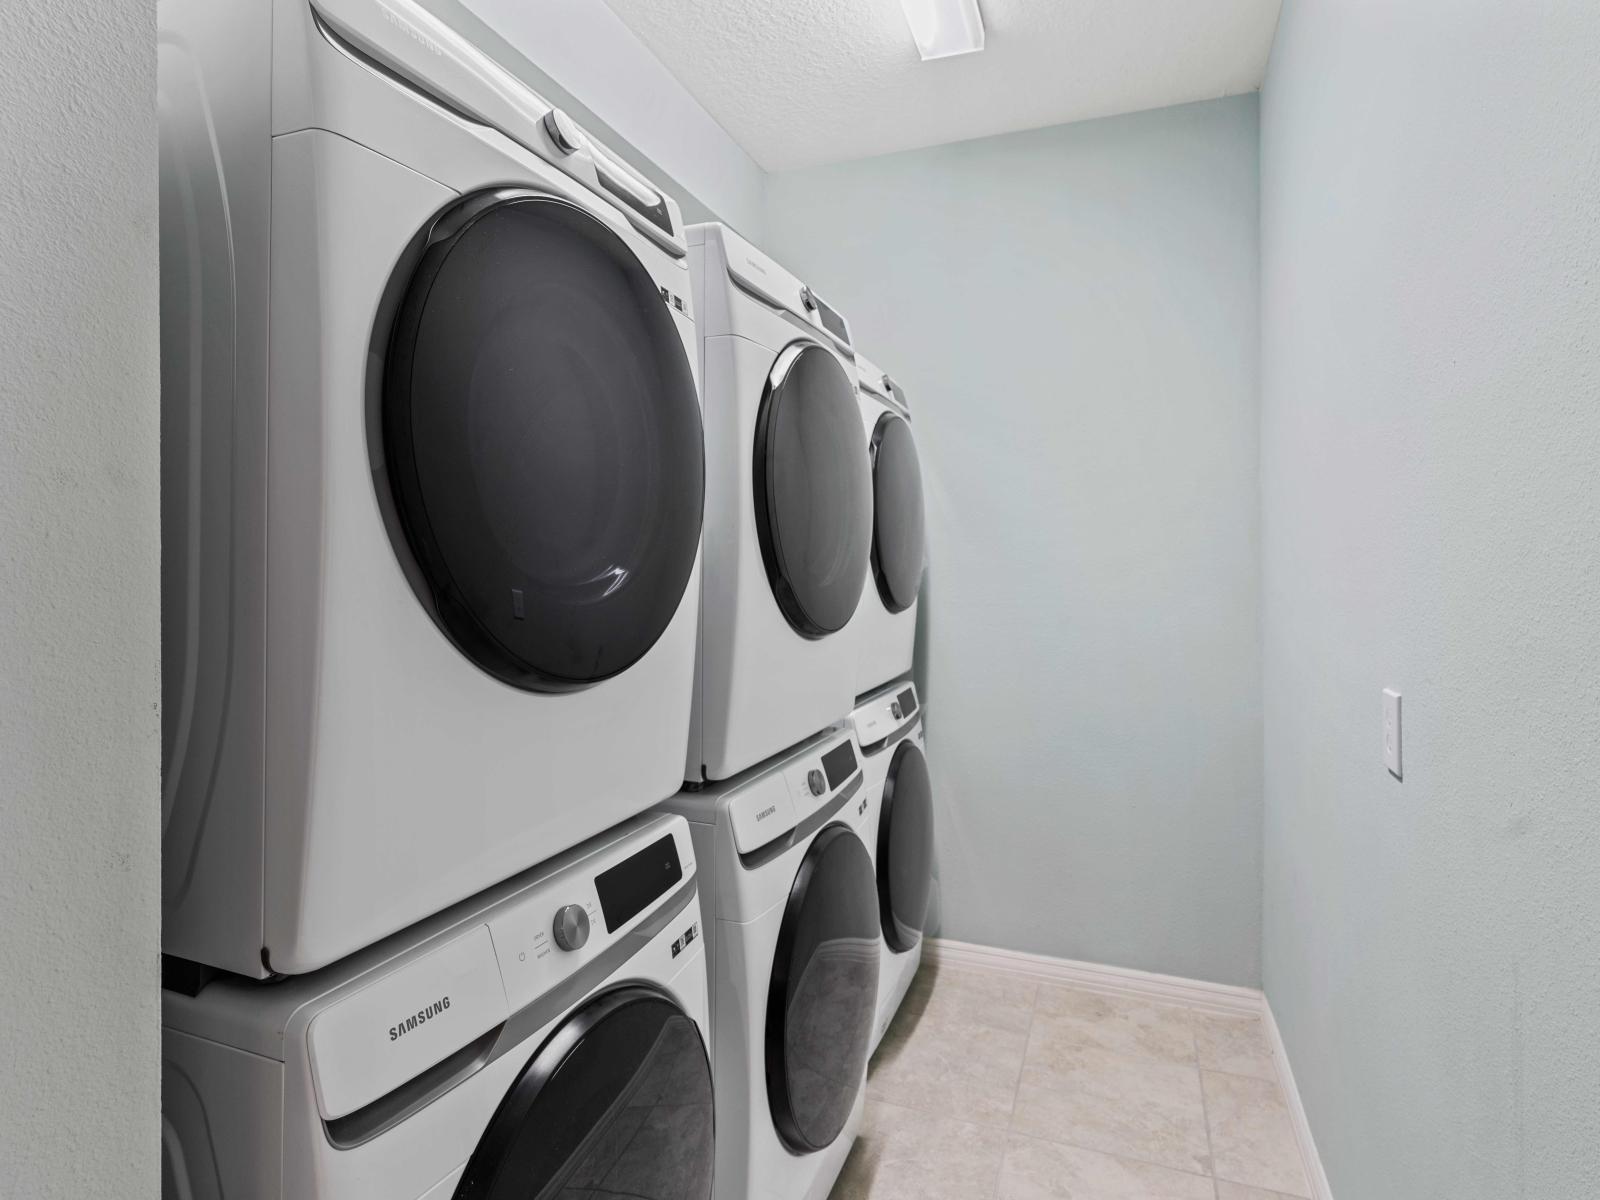 Laundry room with 3 full washers and dryers